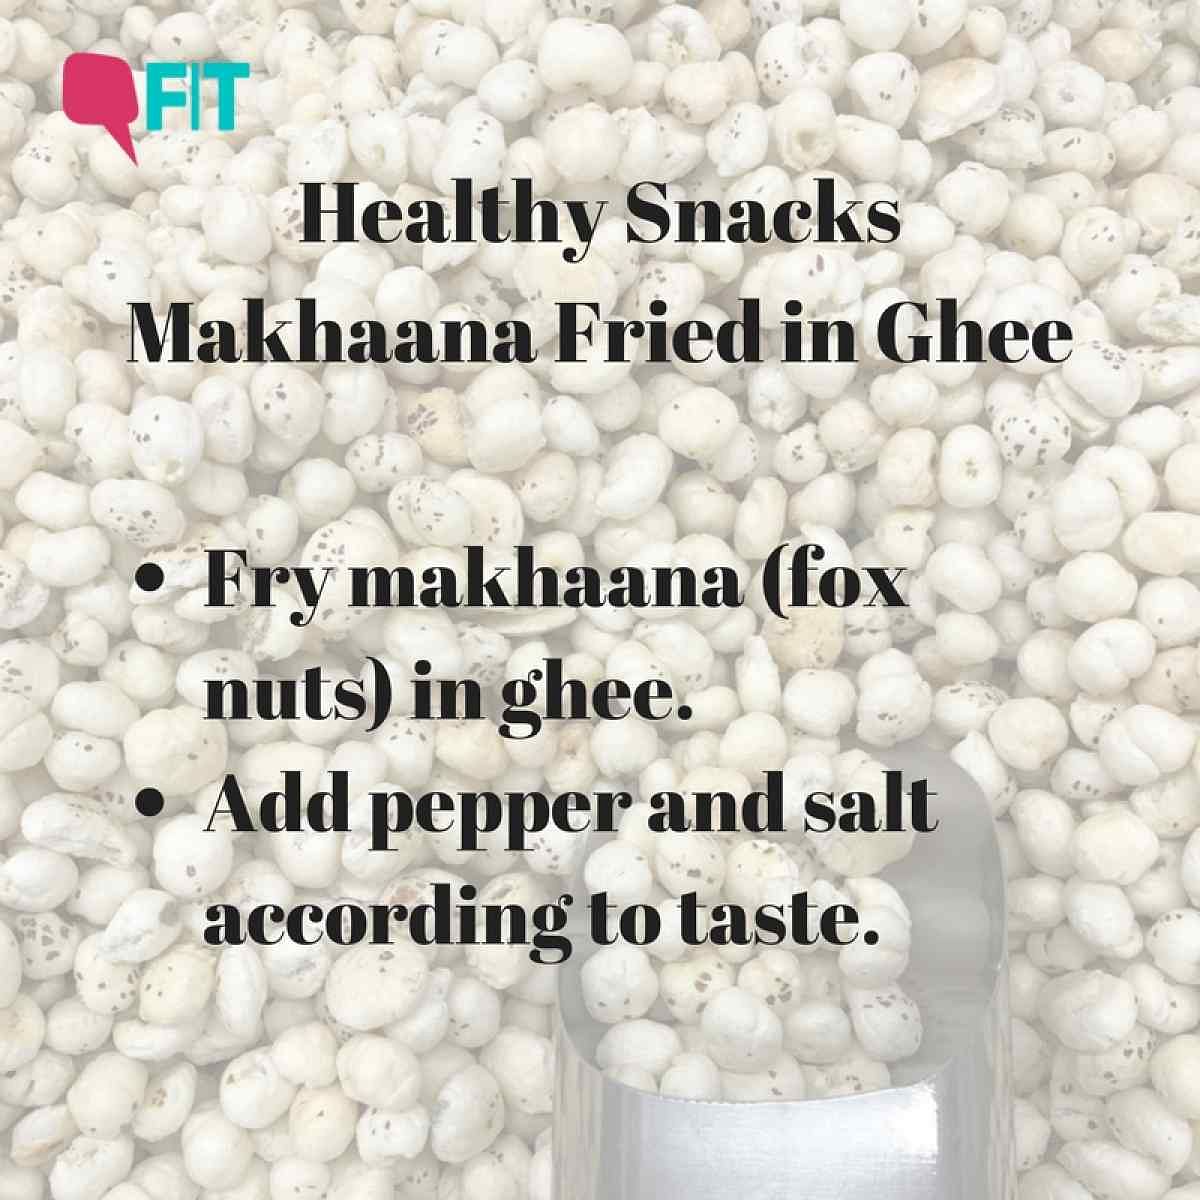 The market is flooded with several ready-to-eat makhana in different flavours, but are they a healthy snack?